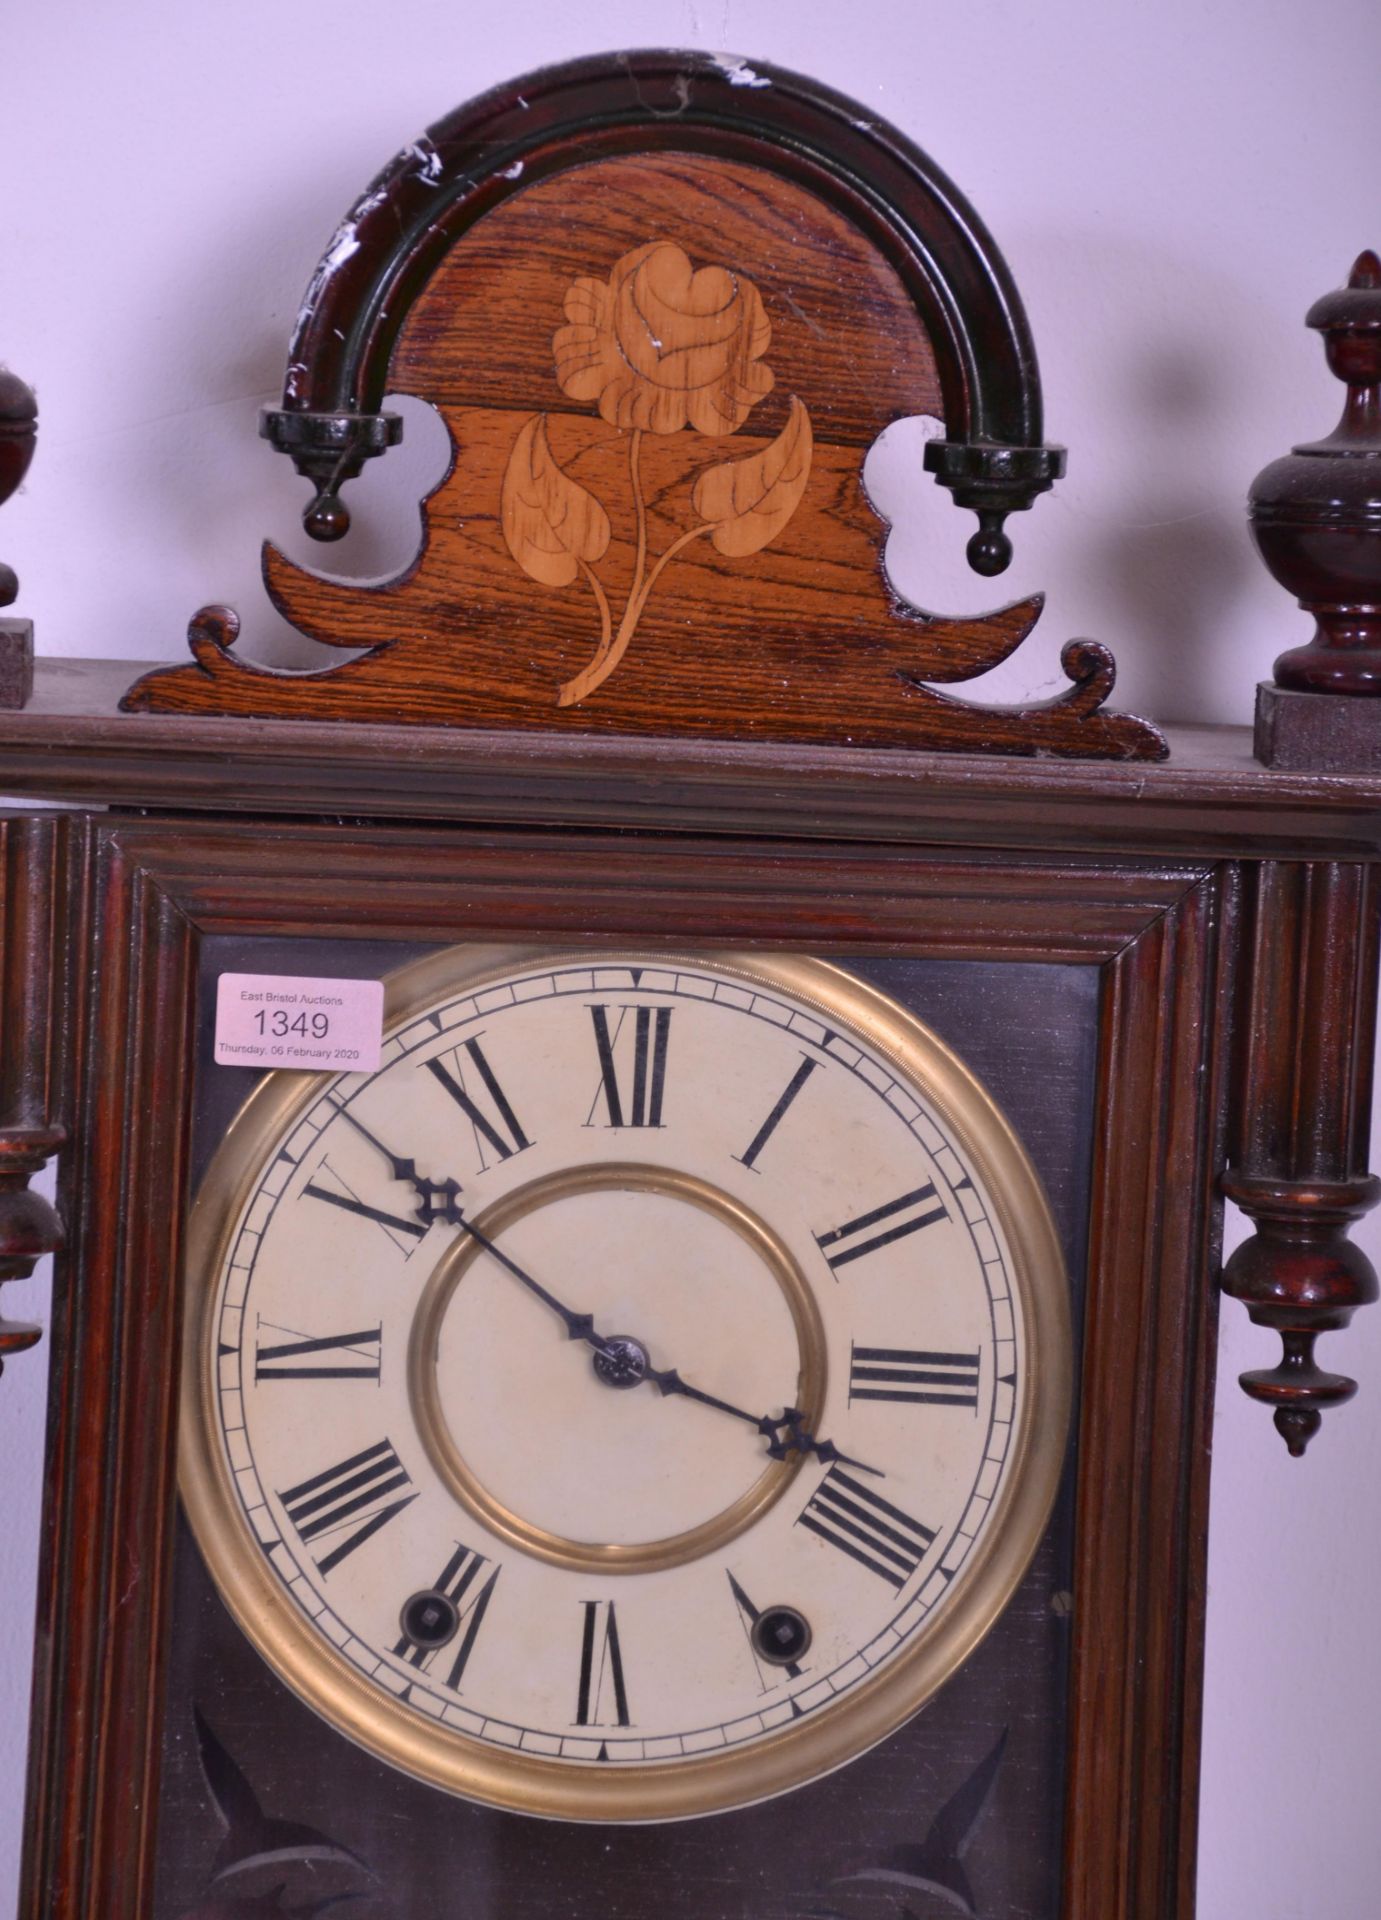 An early 20th century mahogany cased Vienna regulator wall clock complete with pendulum and - Image 2 of 5